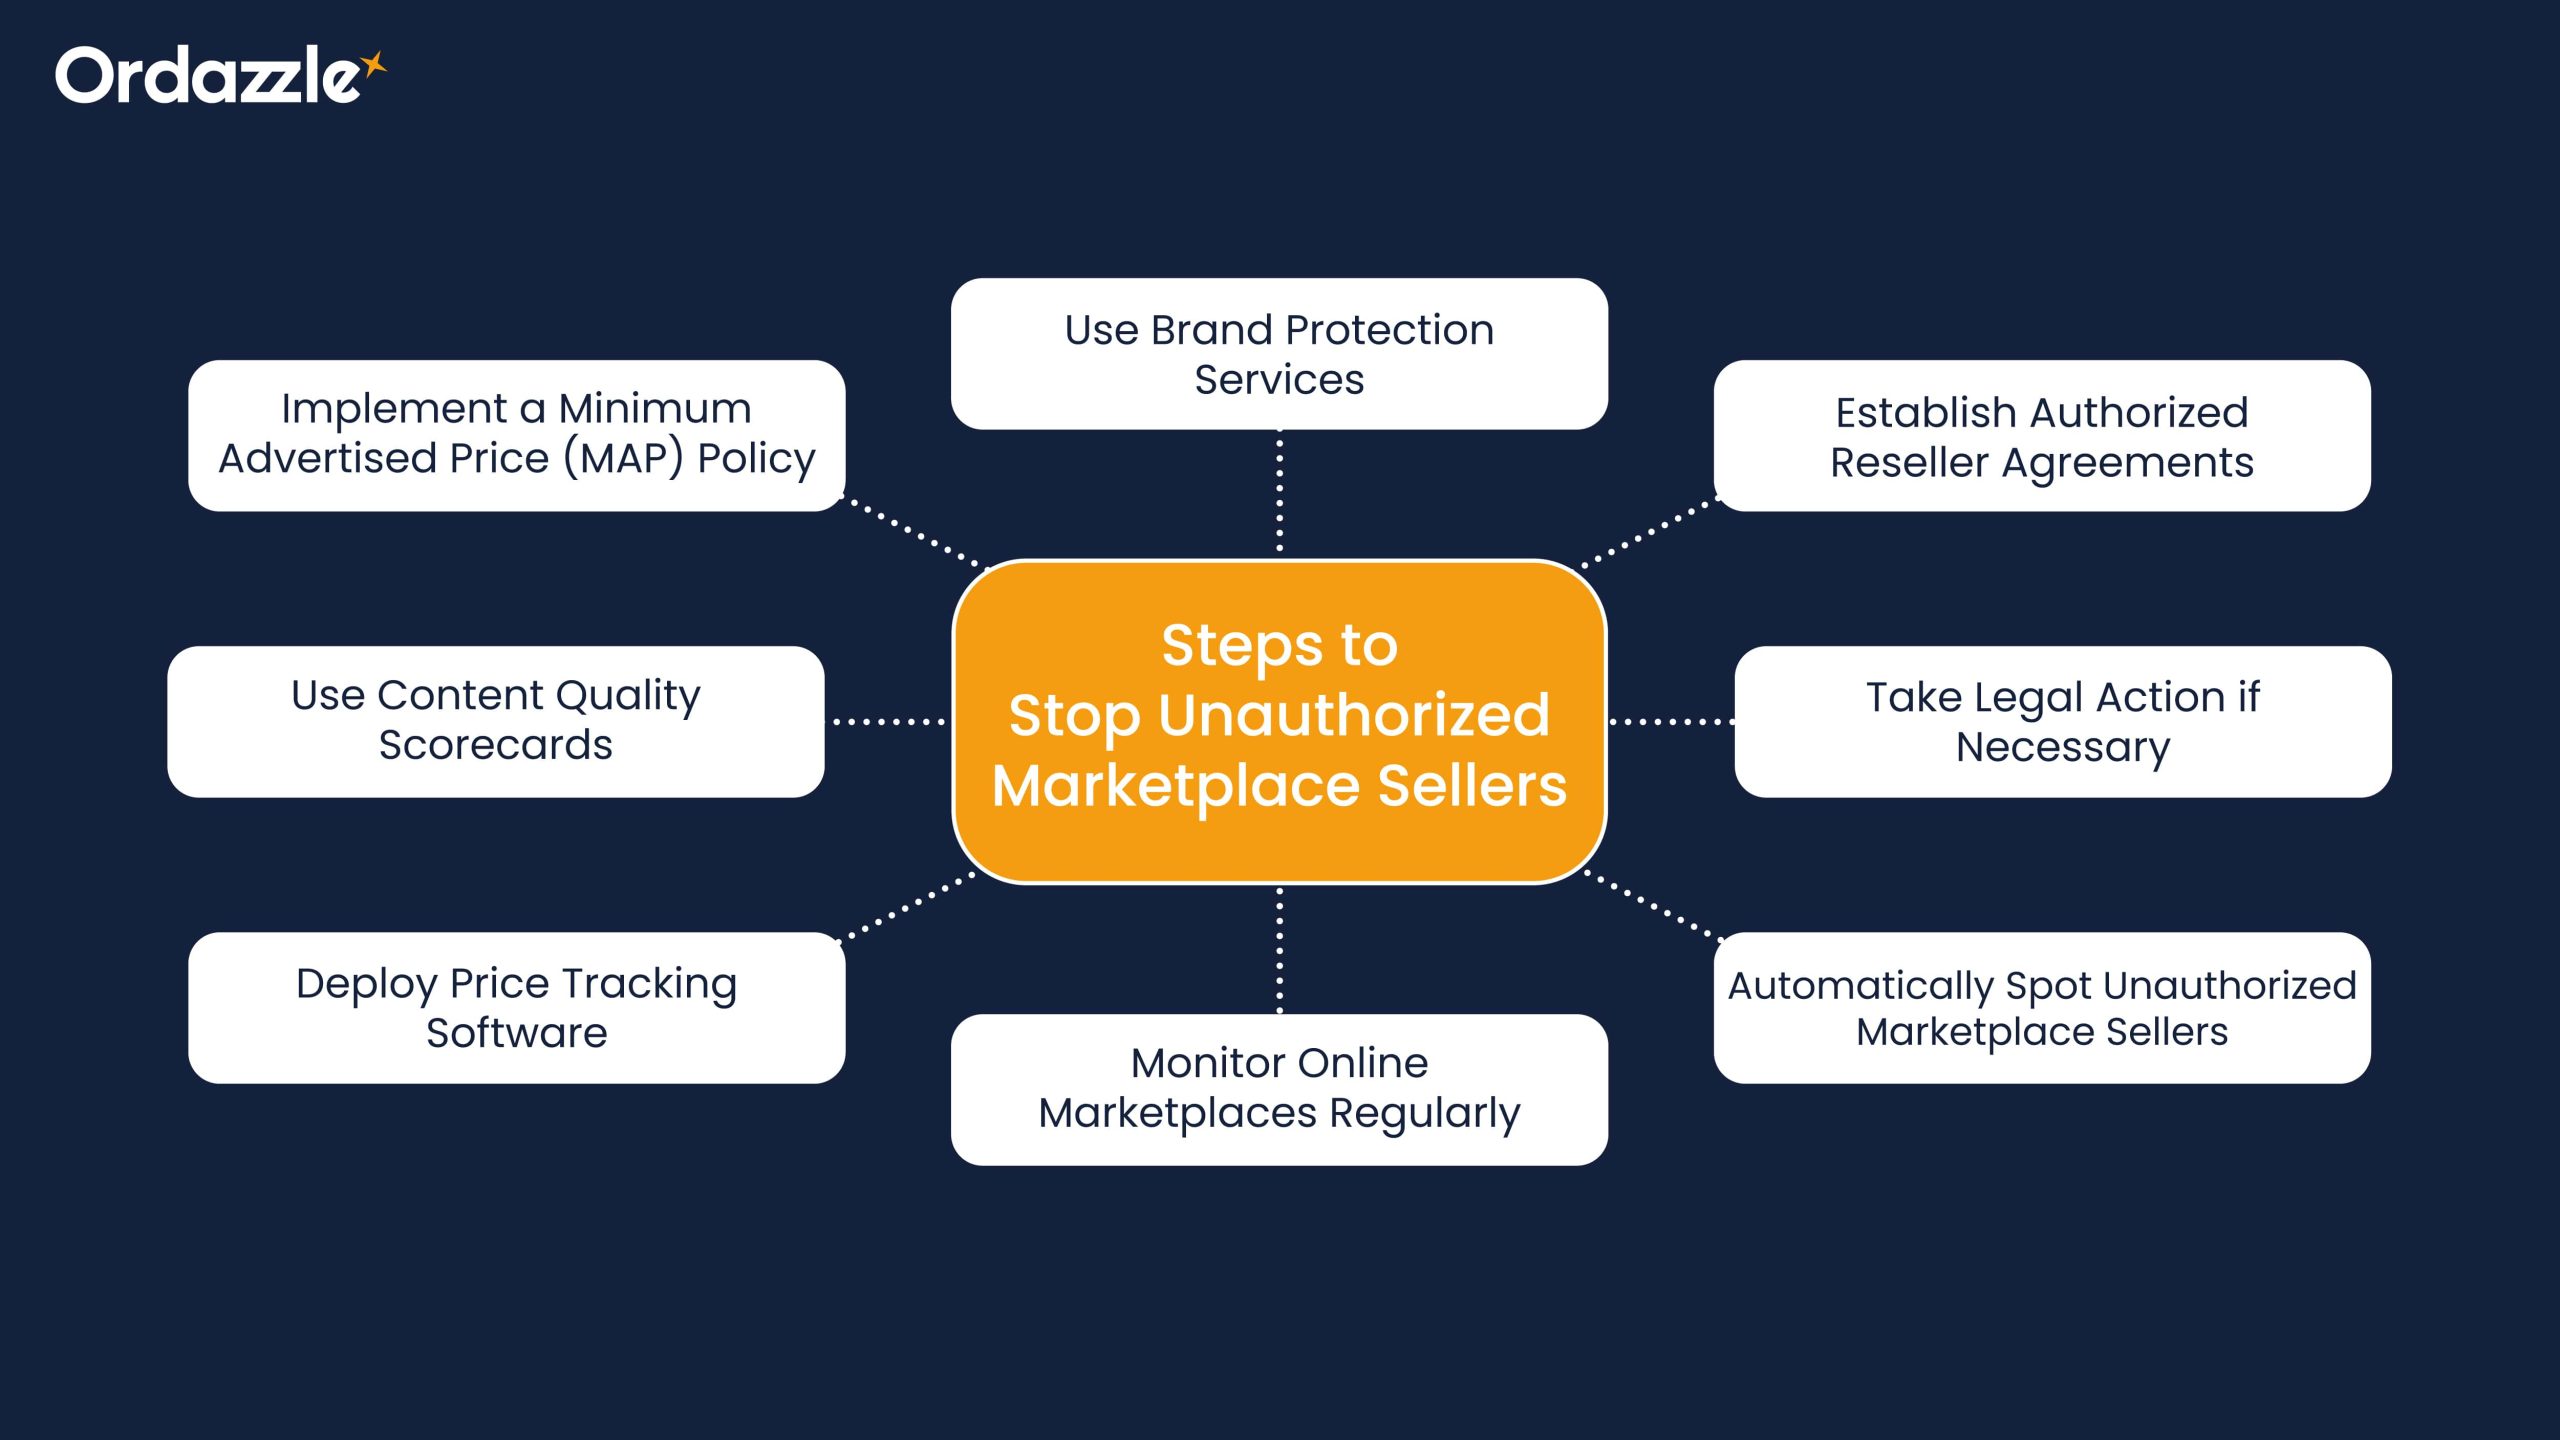 Steps to Stop Unauthorized Marketplace Sellers